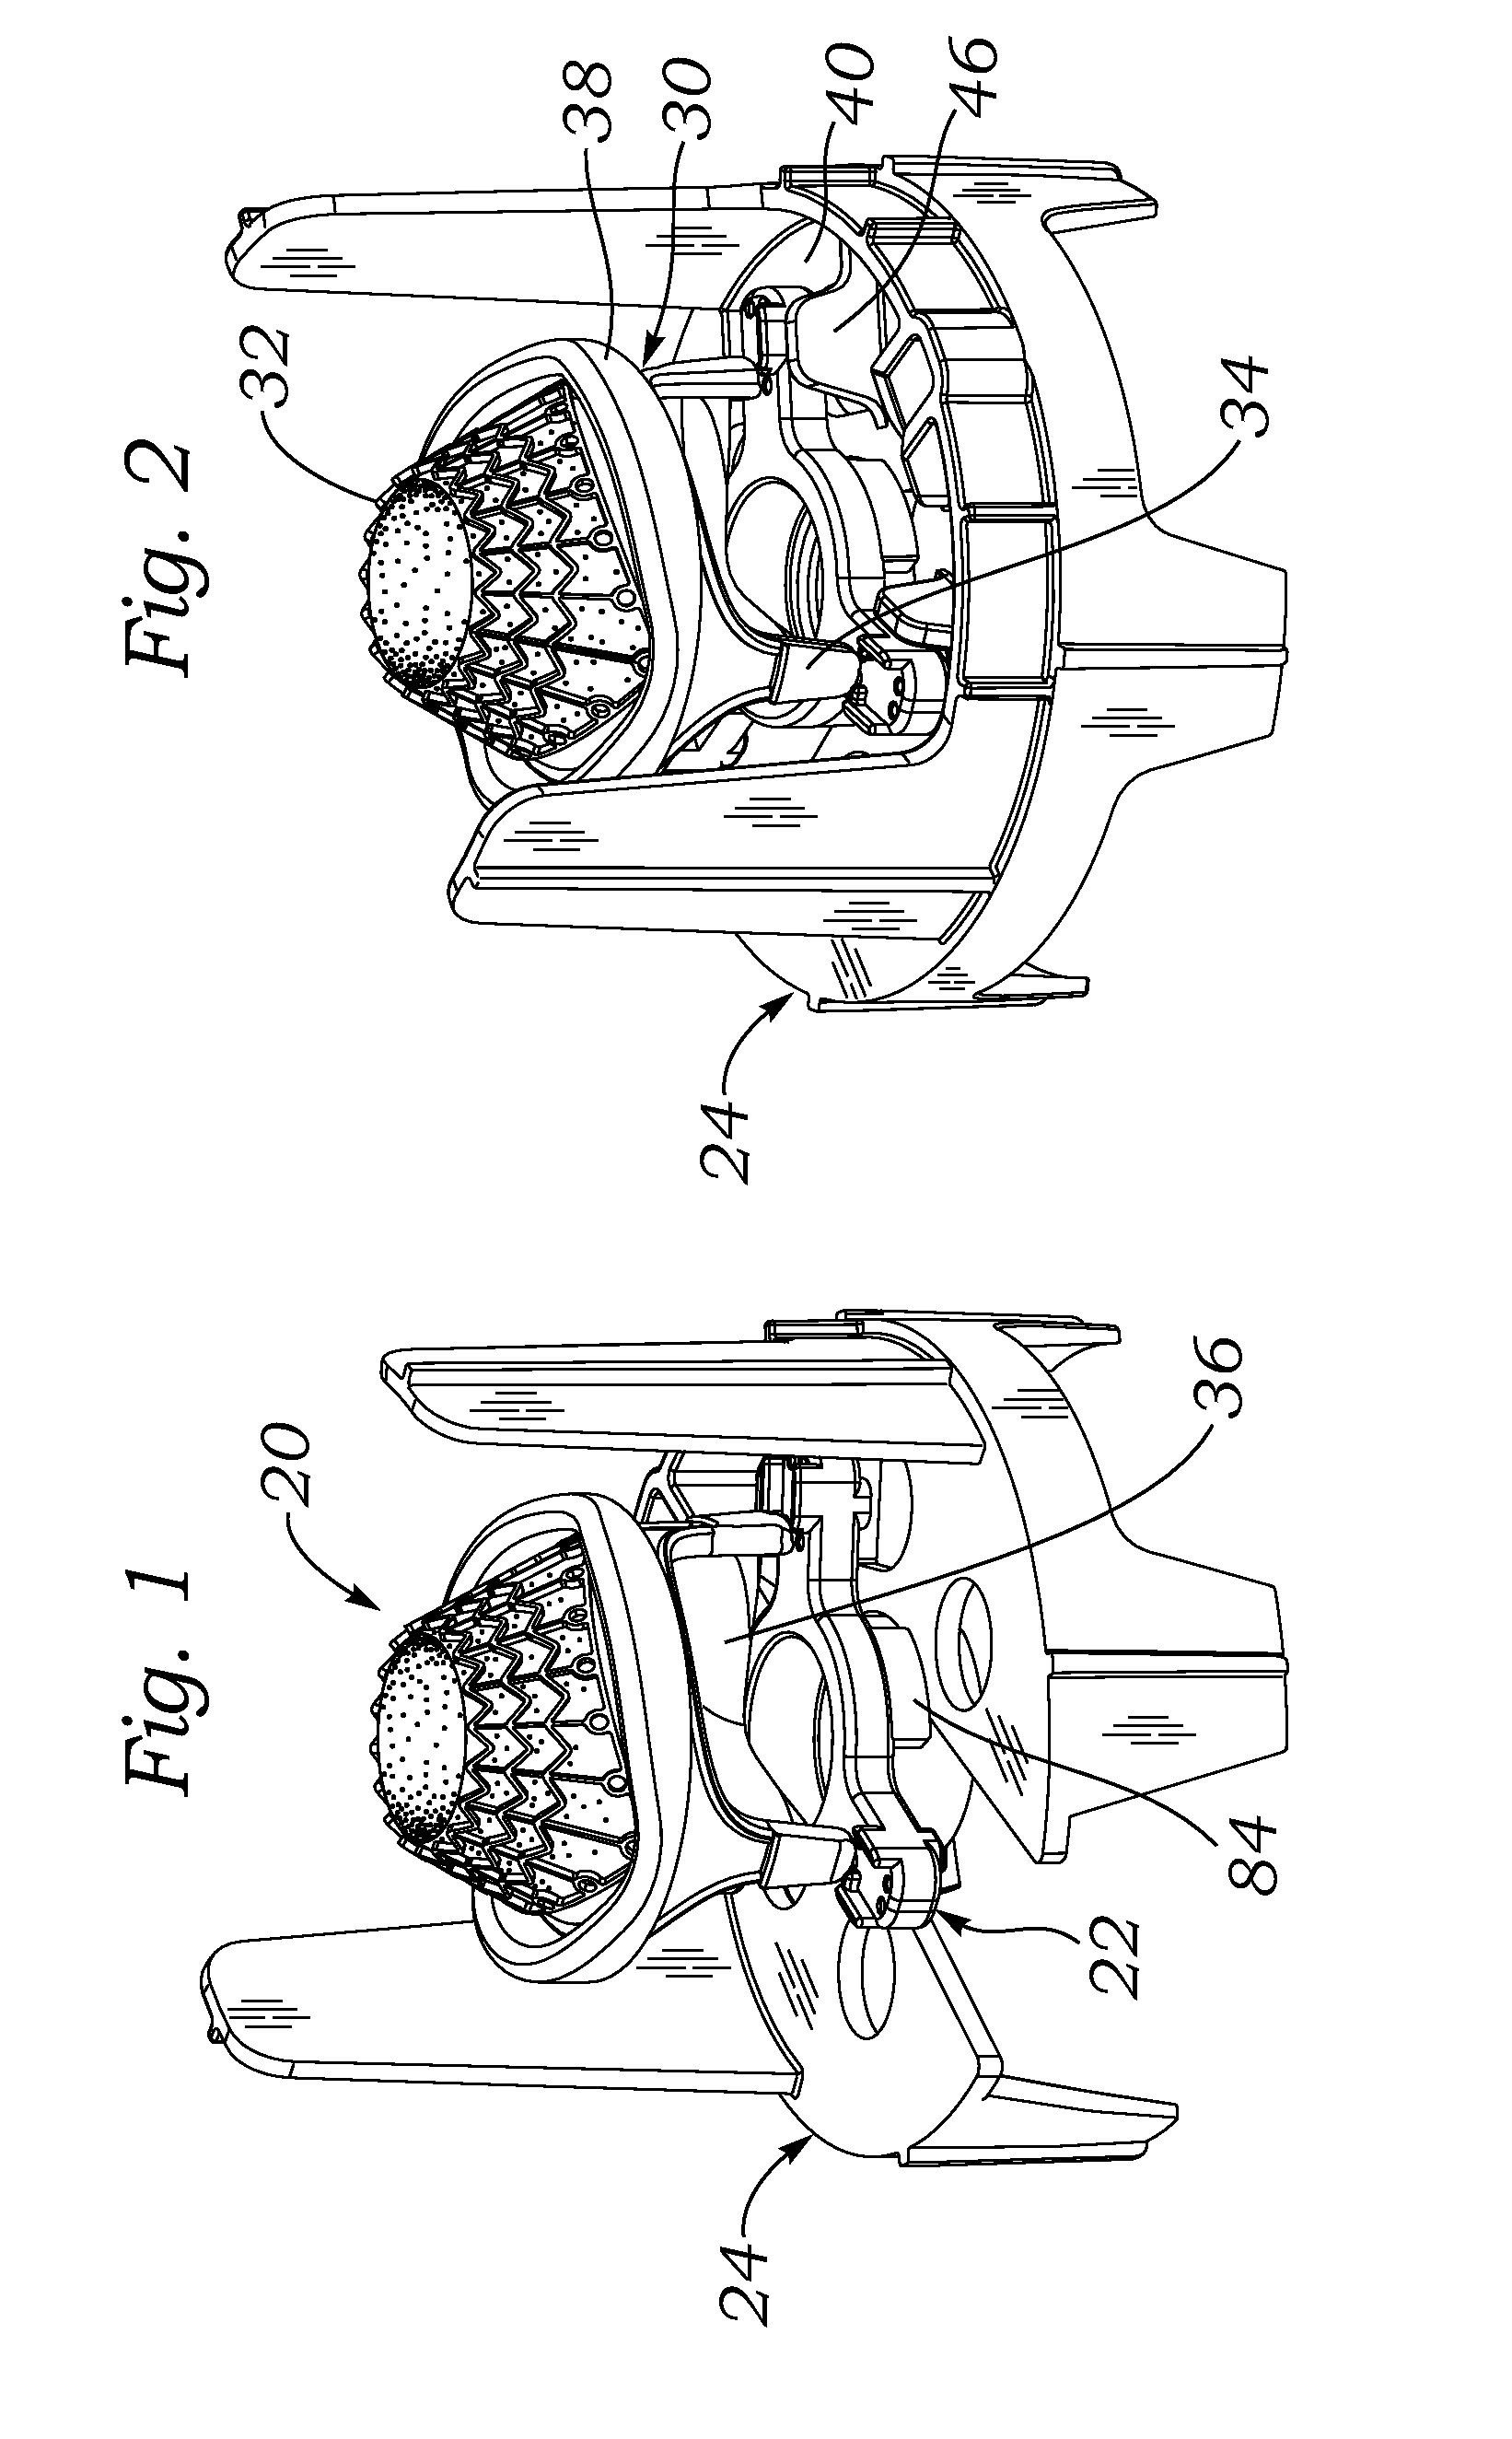 Prosthetic heart valve packaging and deployment system